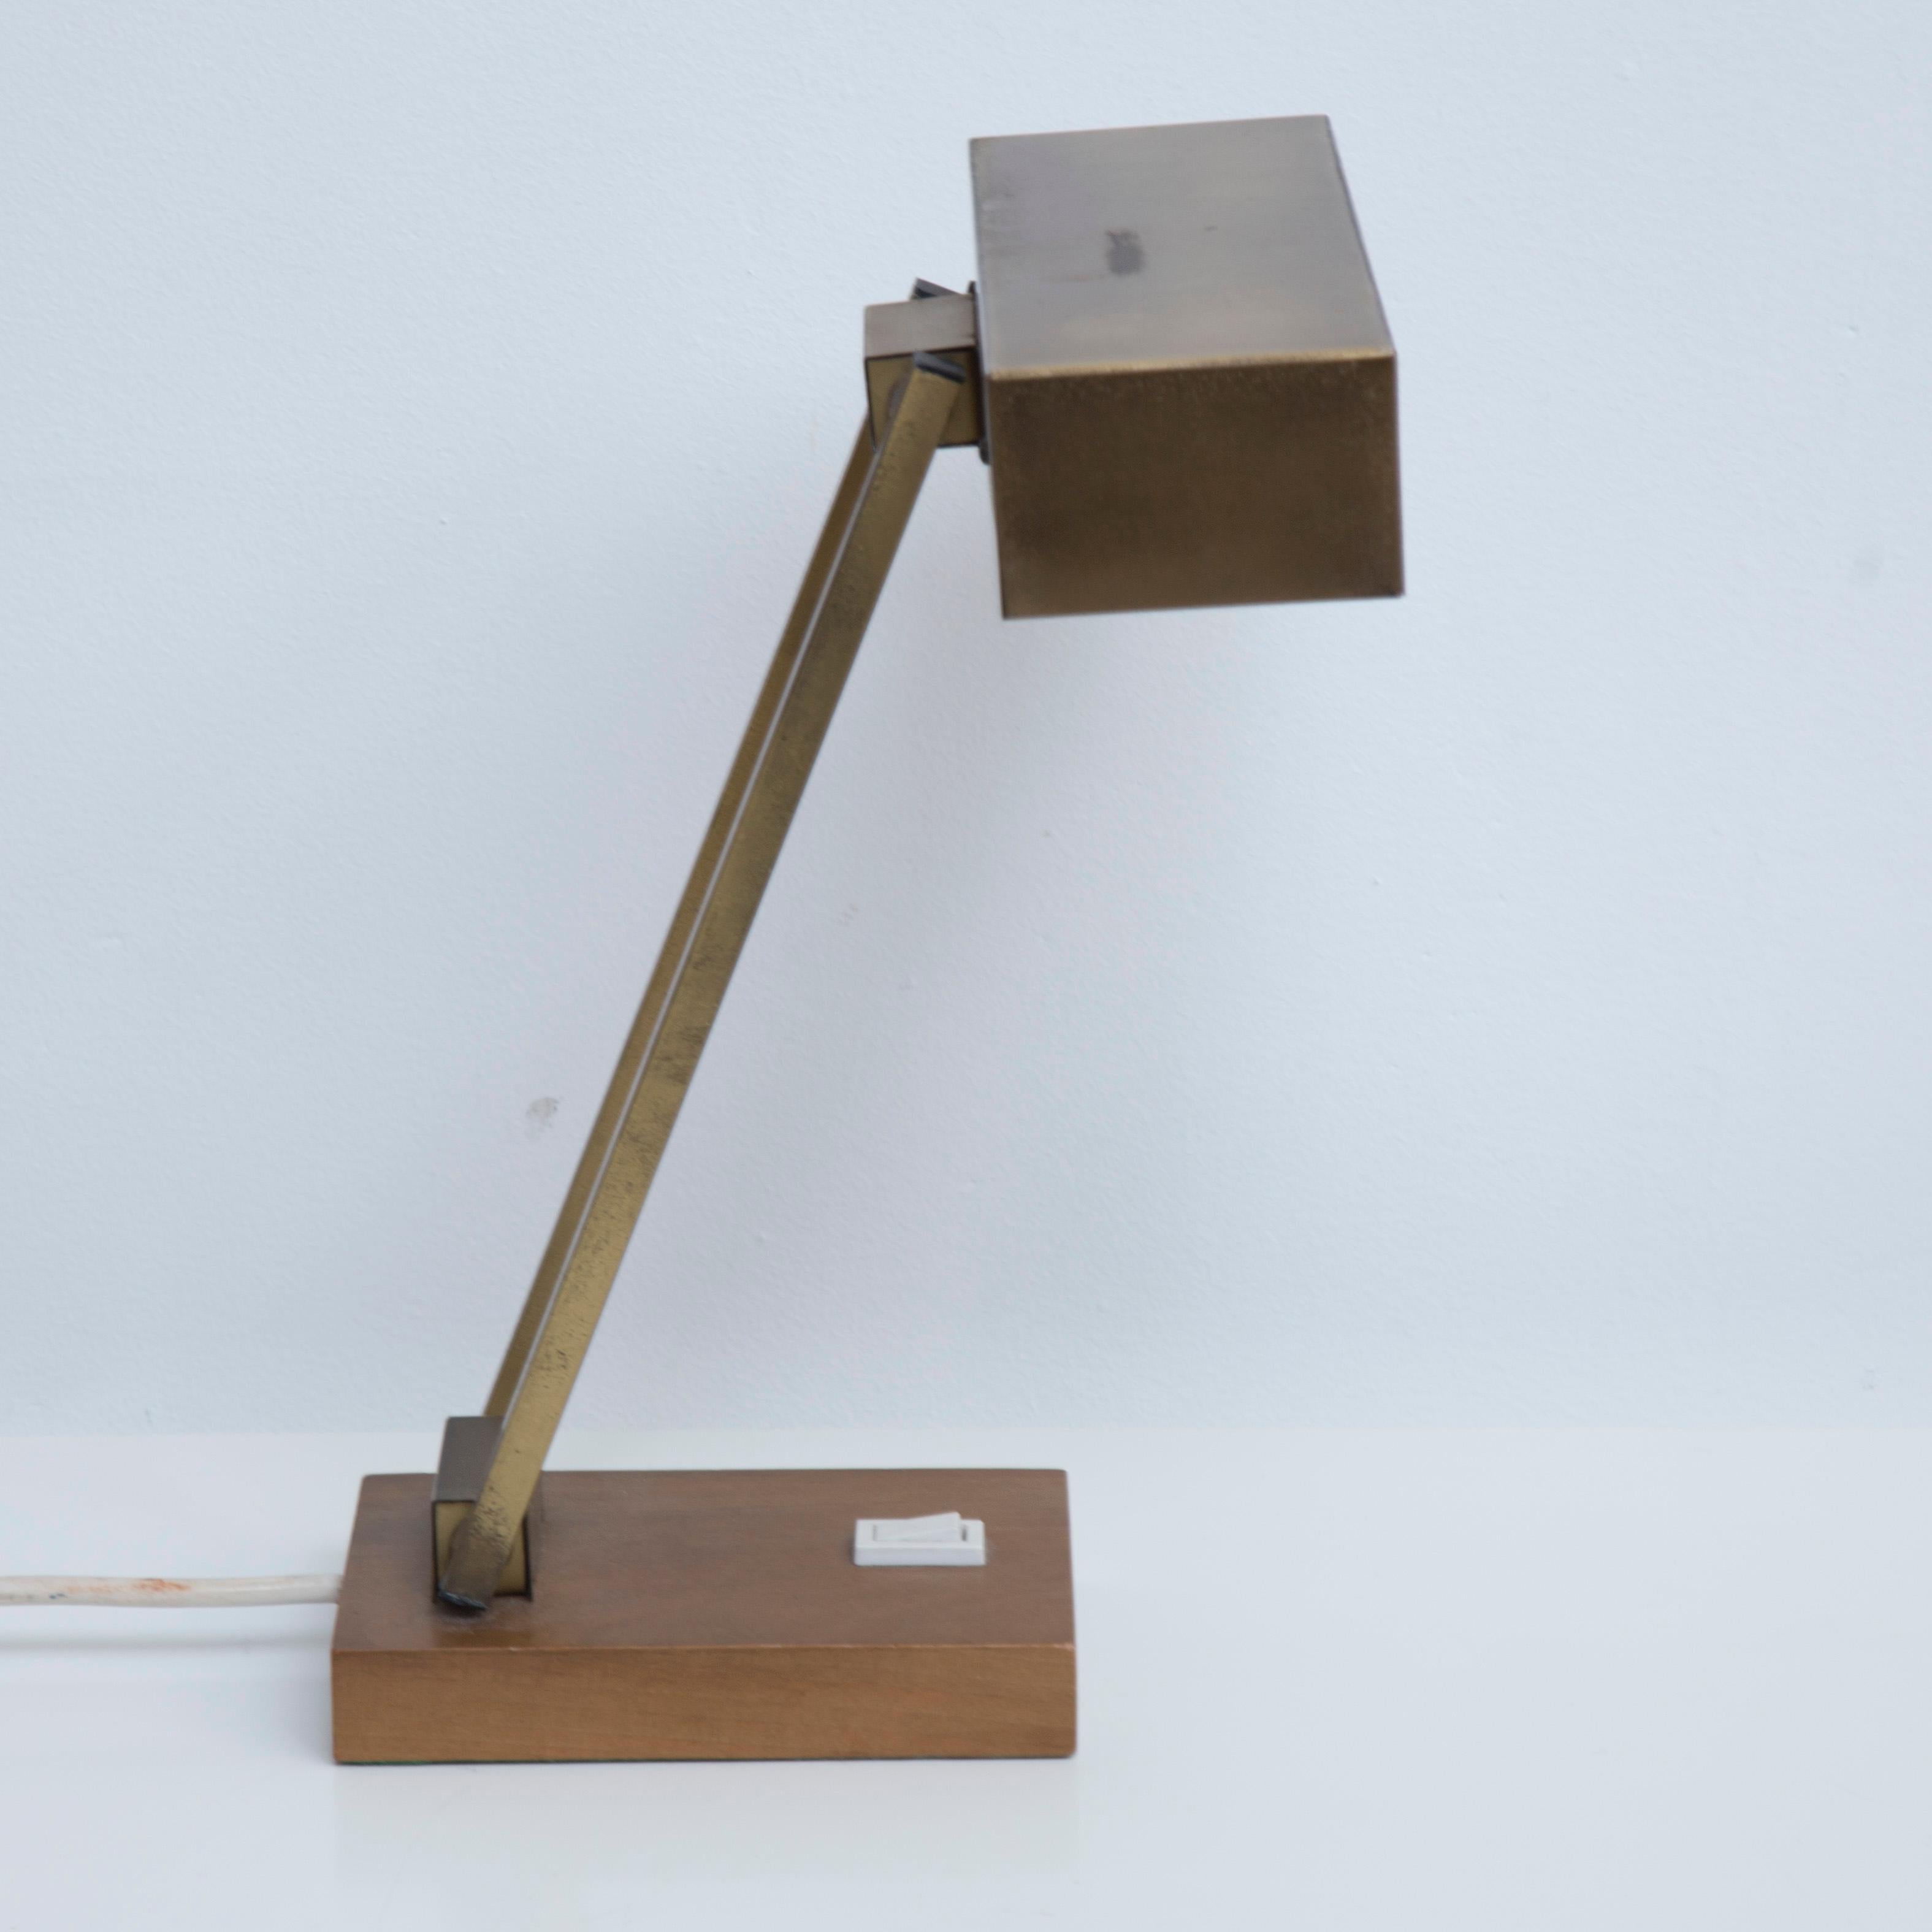 Beautiful desk lamp produced in the 50s. The lamp is adjustable and made of brass and shows a lovely patina. Very nice sculptural lines through the double adjustable arm on a brass base.